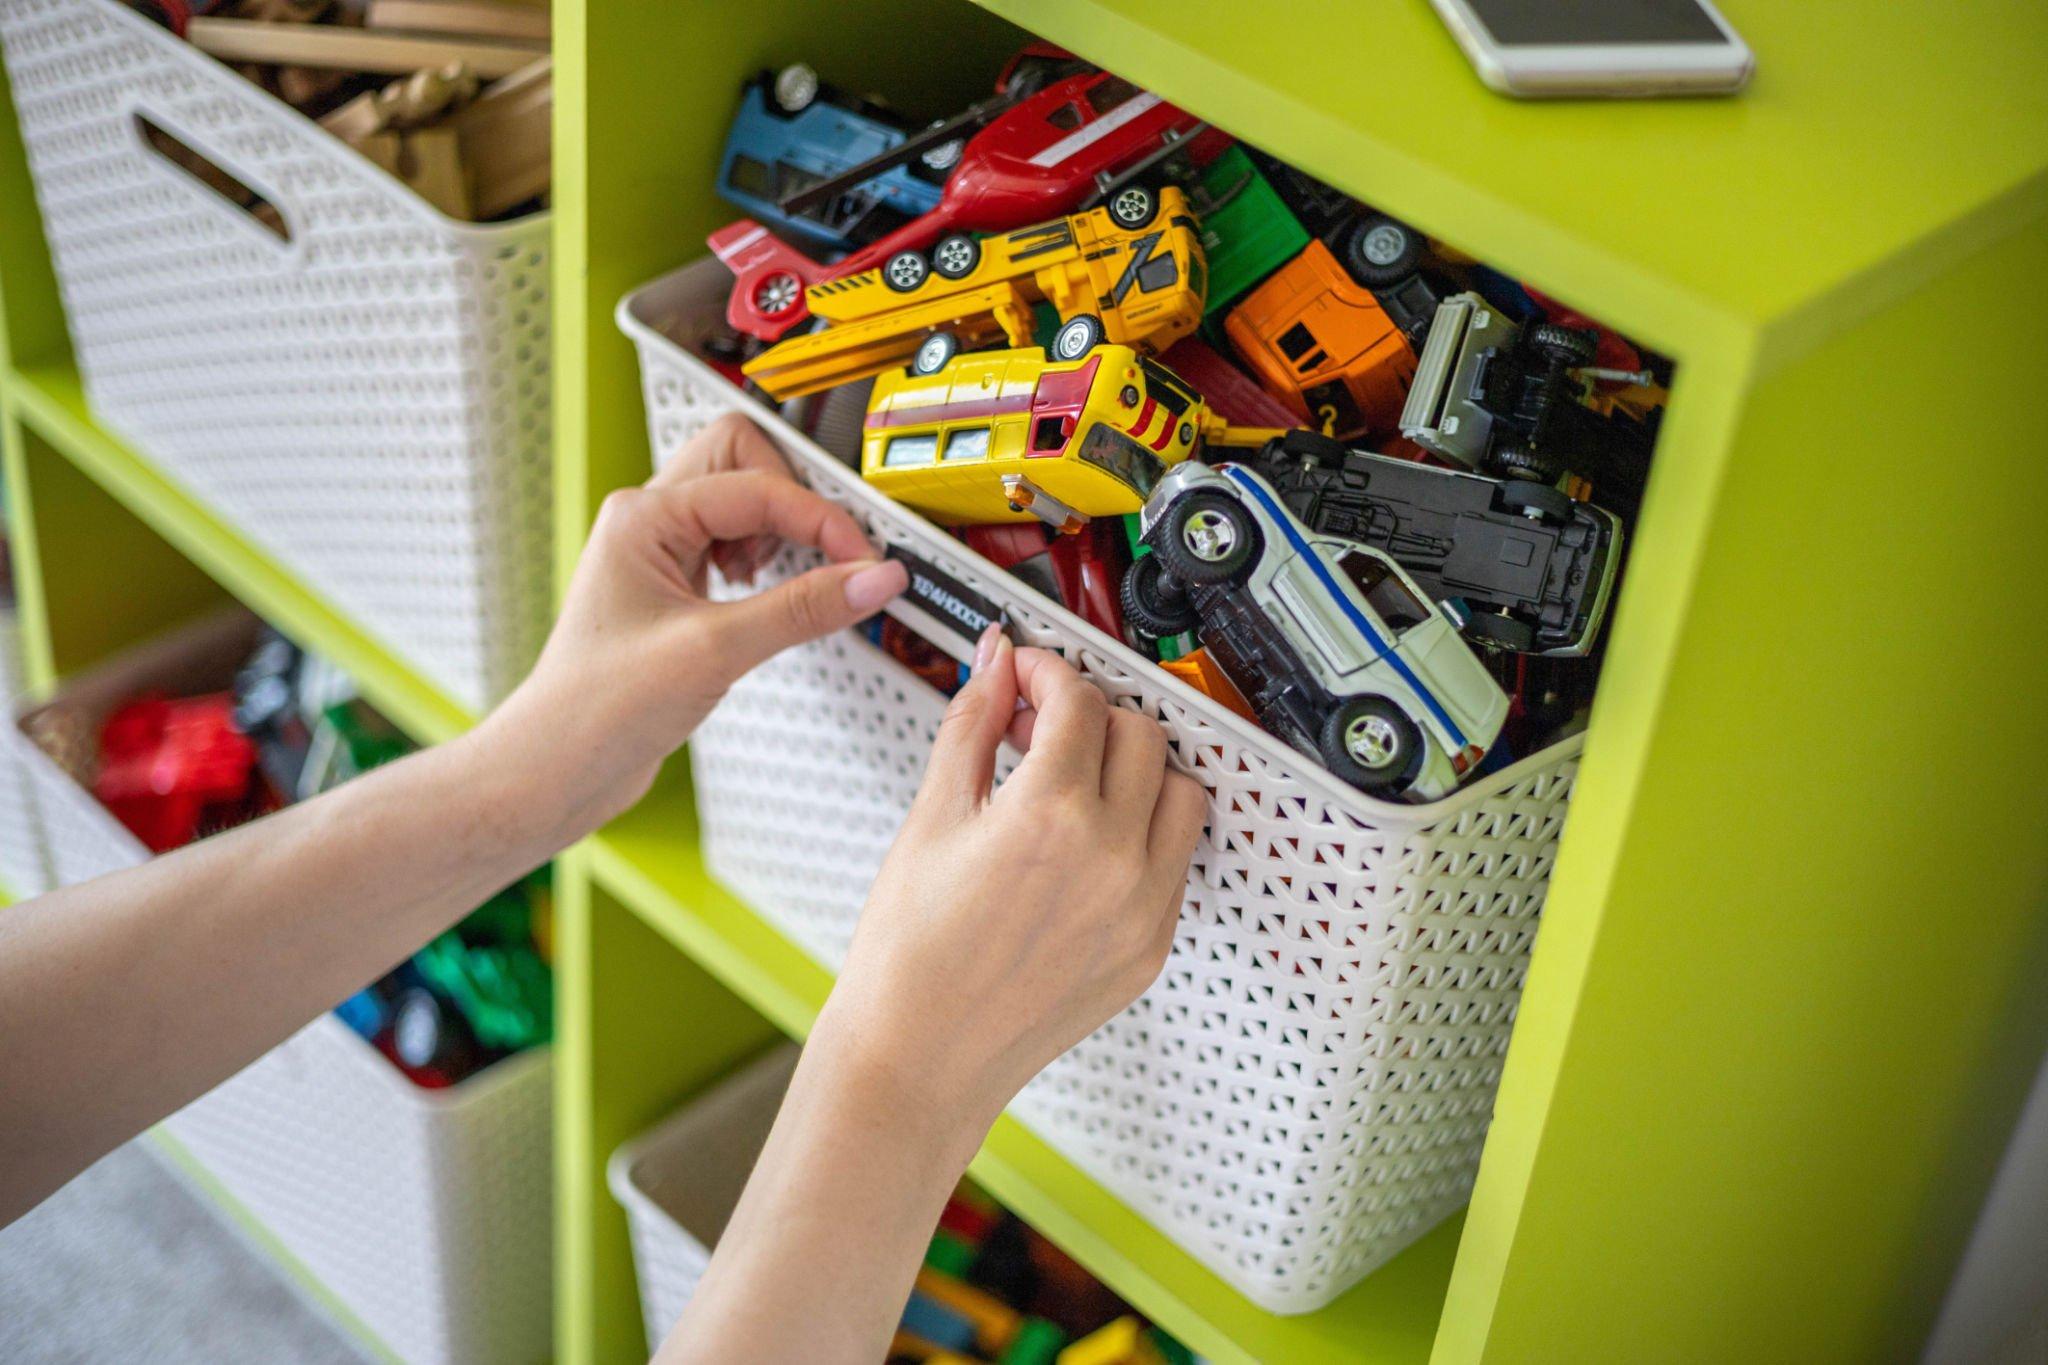 From Chaos to Order: 10 Smart Storage Ideas for Organizing Your Kids’ Toys